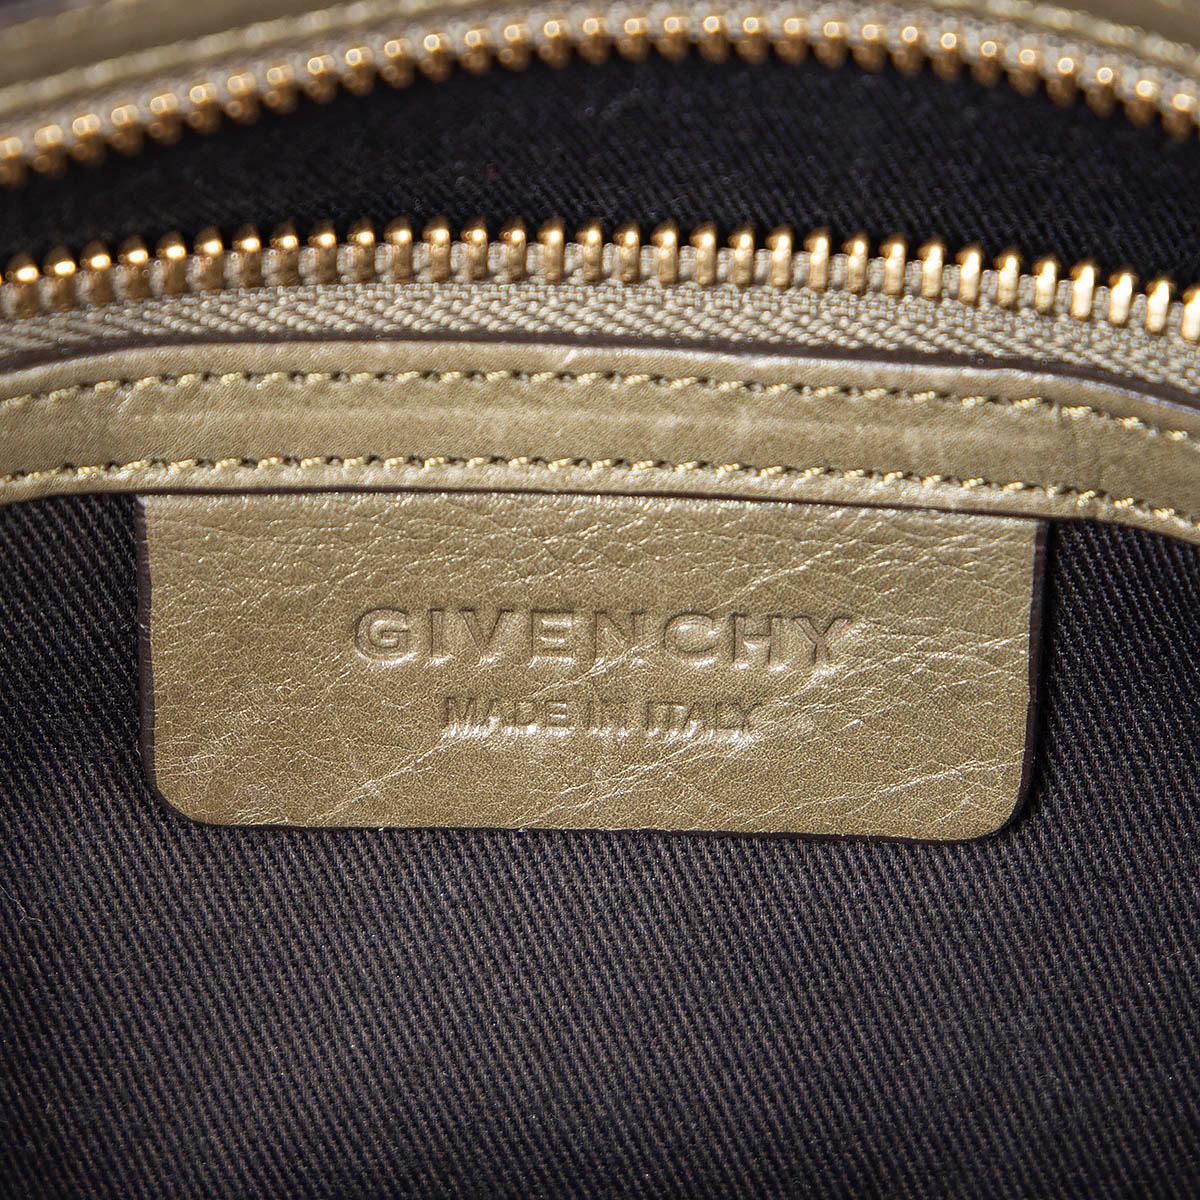 GIVENCHY khaki green leather NIGHTINGALE DOME Shoulder Bag For Sale 1